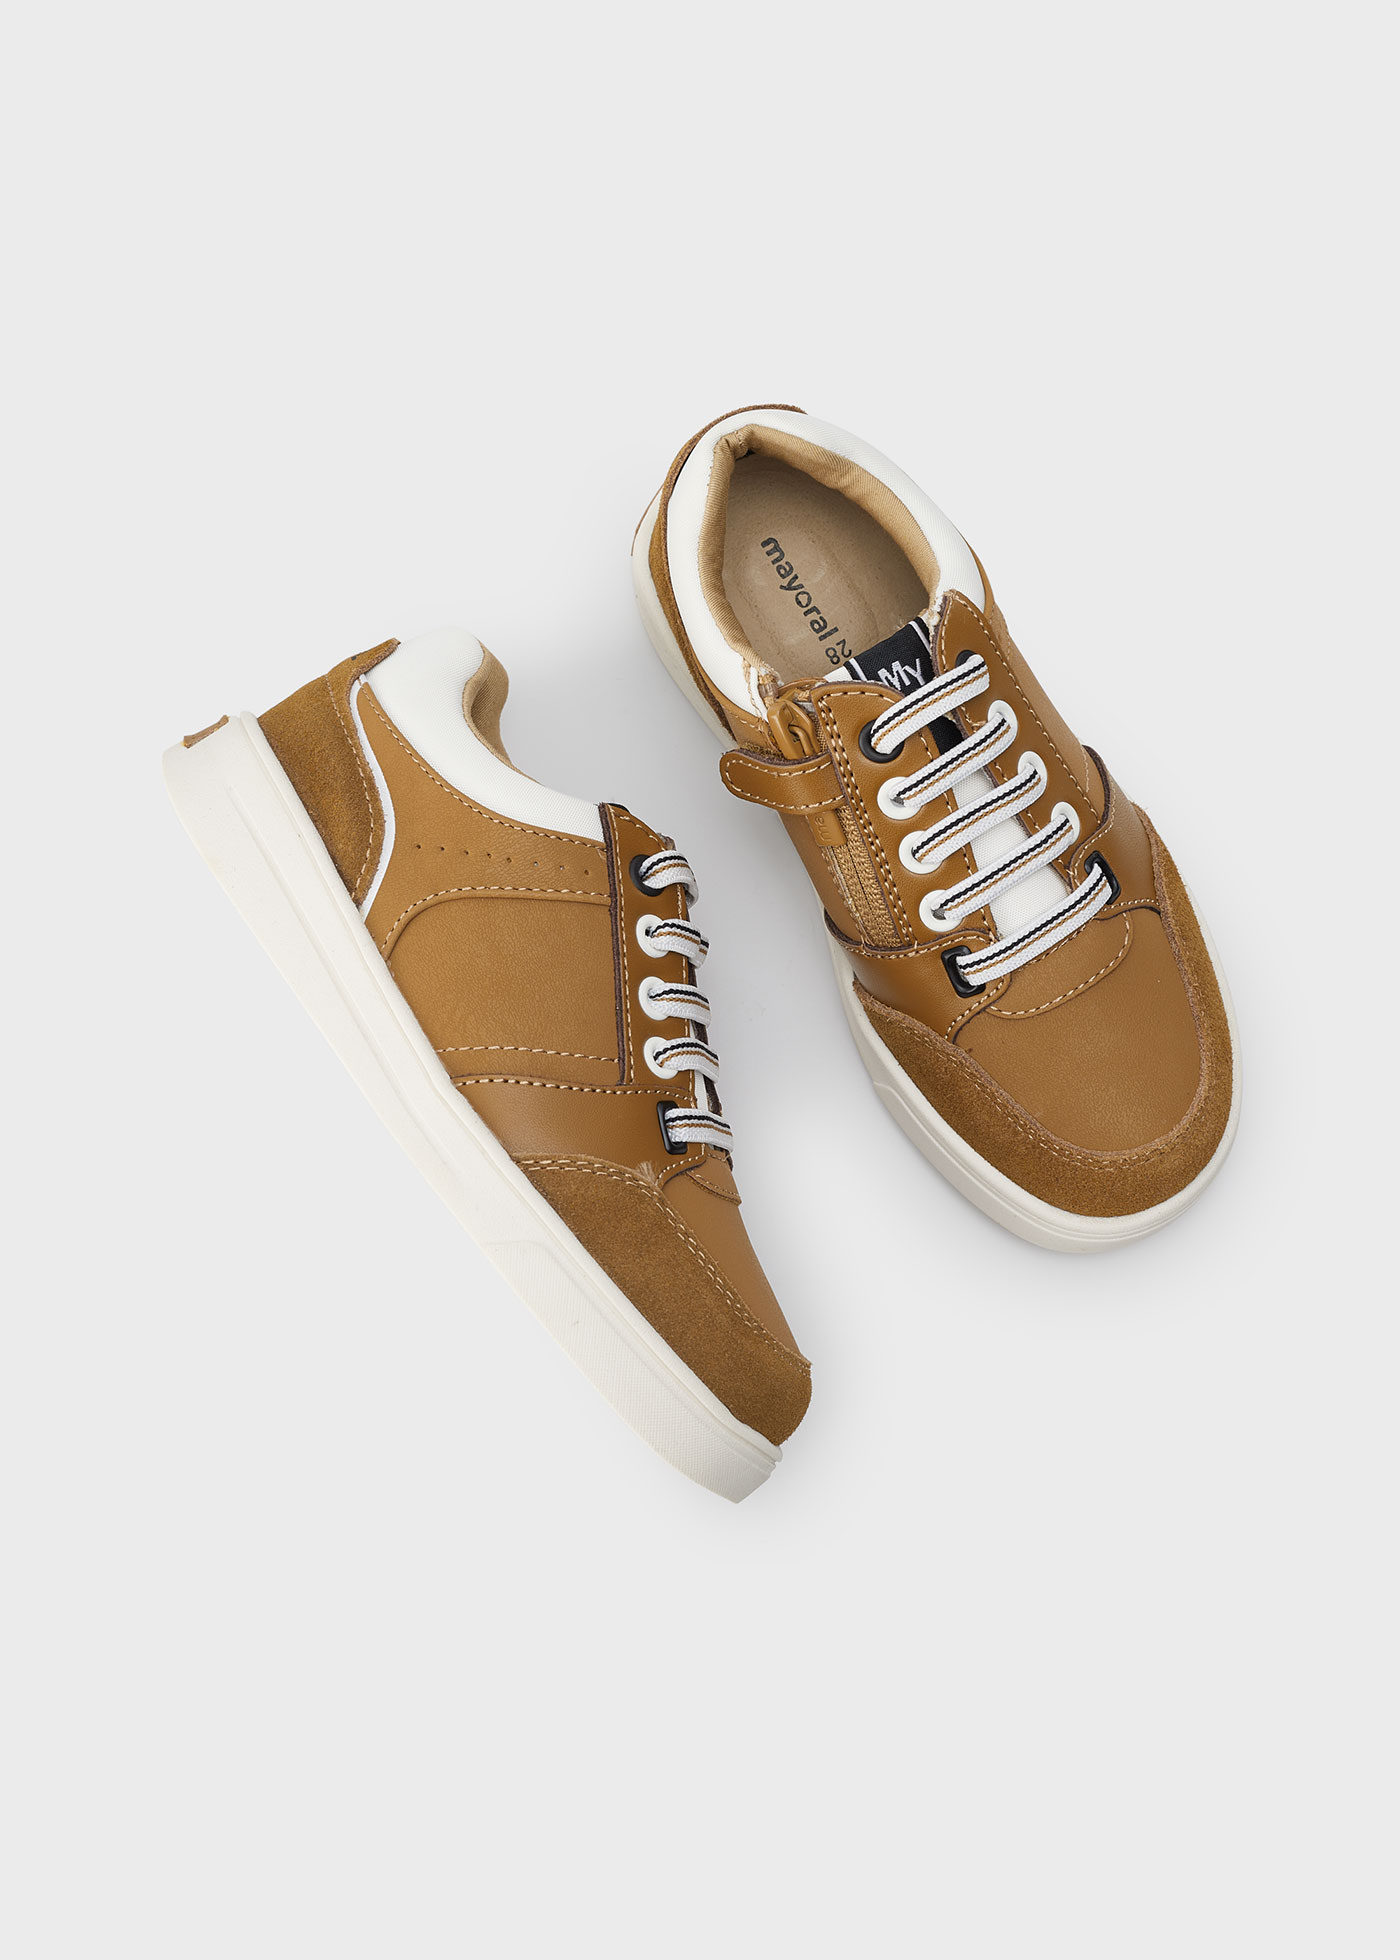 Boys casual sneakers sustainable leather